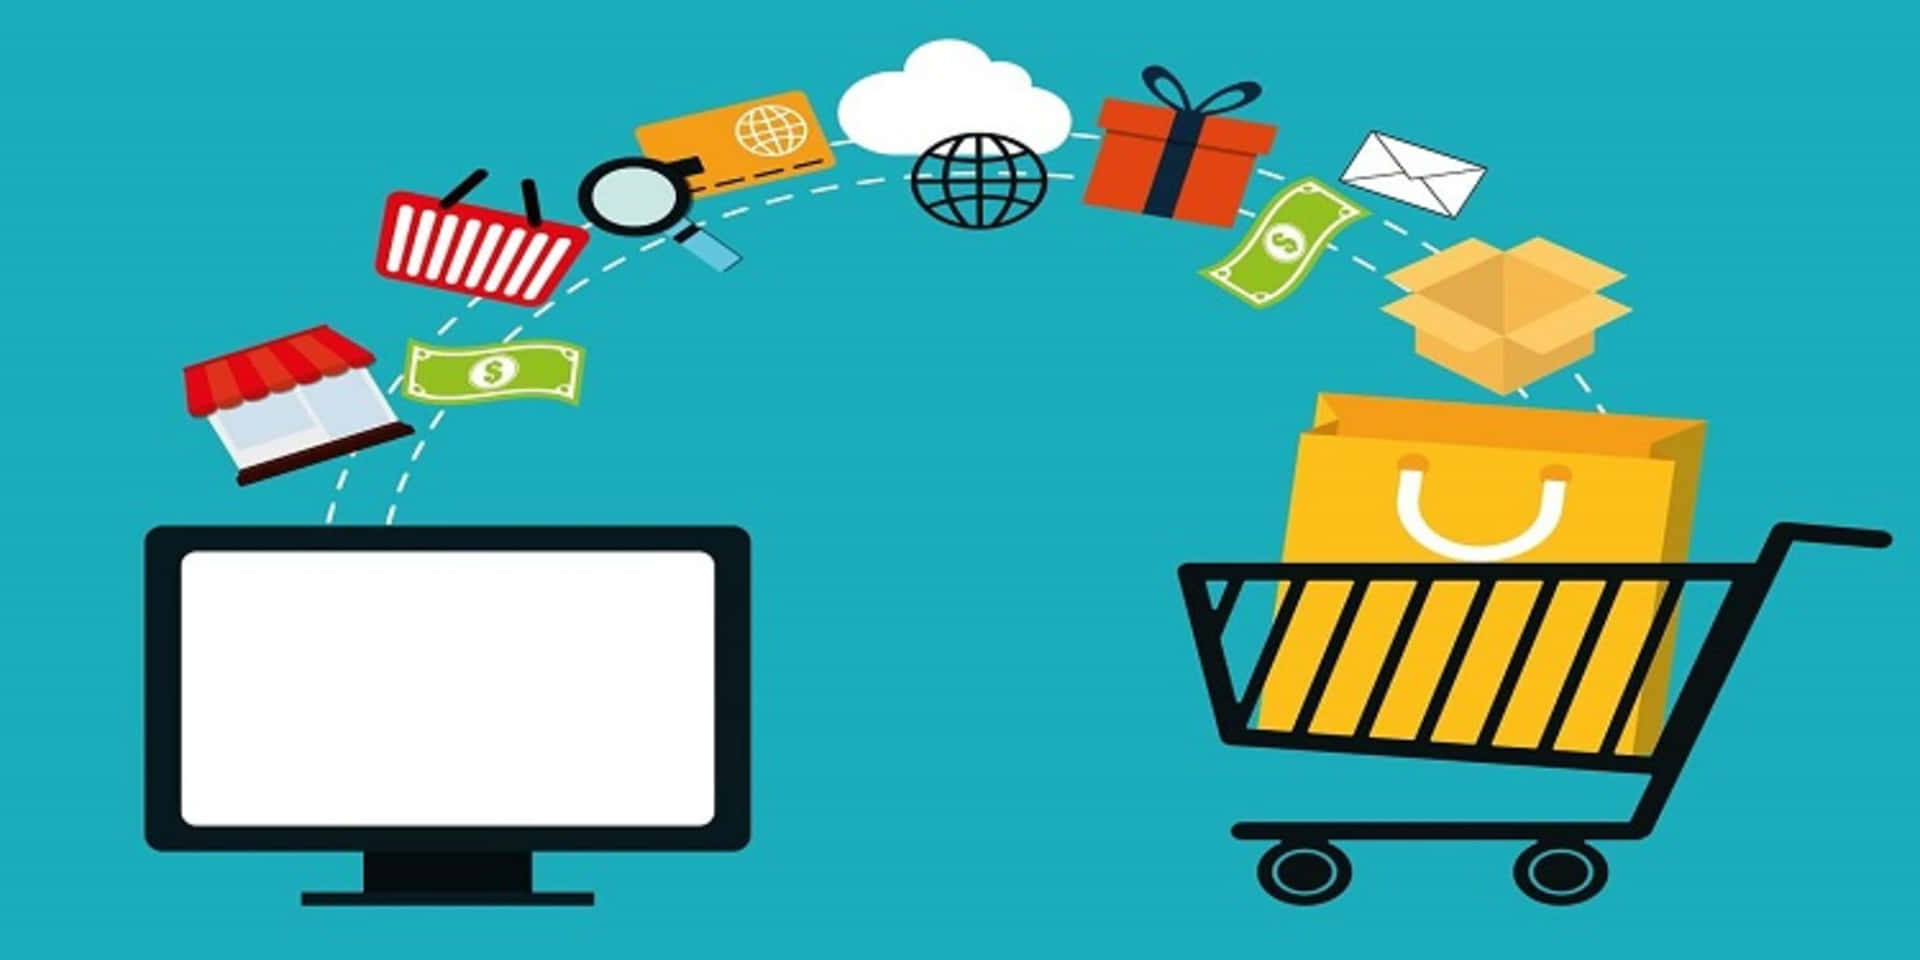 Download Ecommerce Marketing - What Is It? | Wallpapers.com